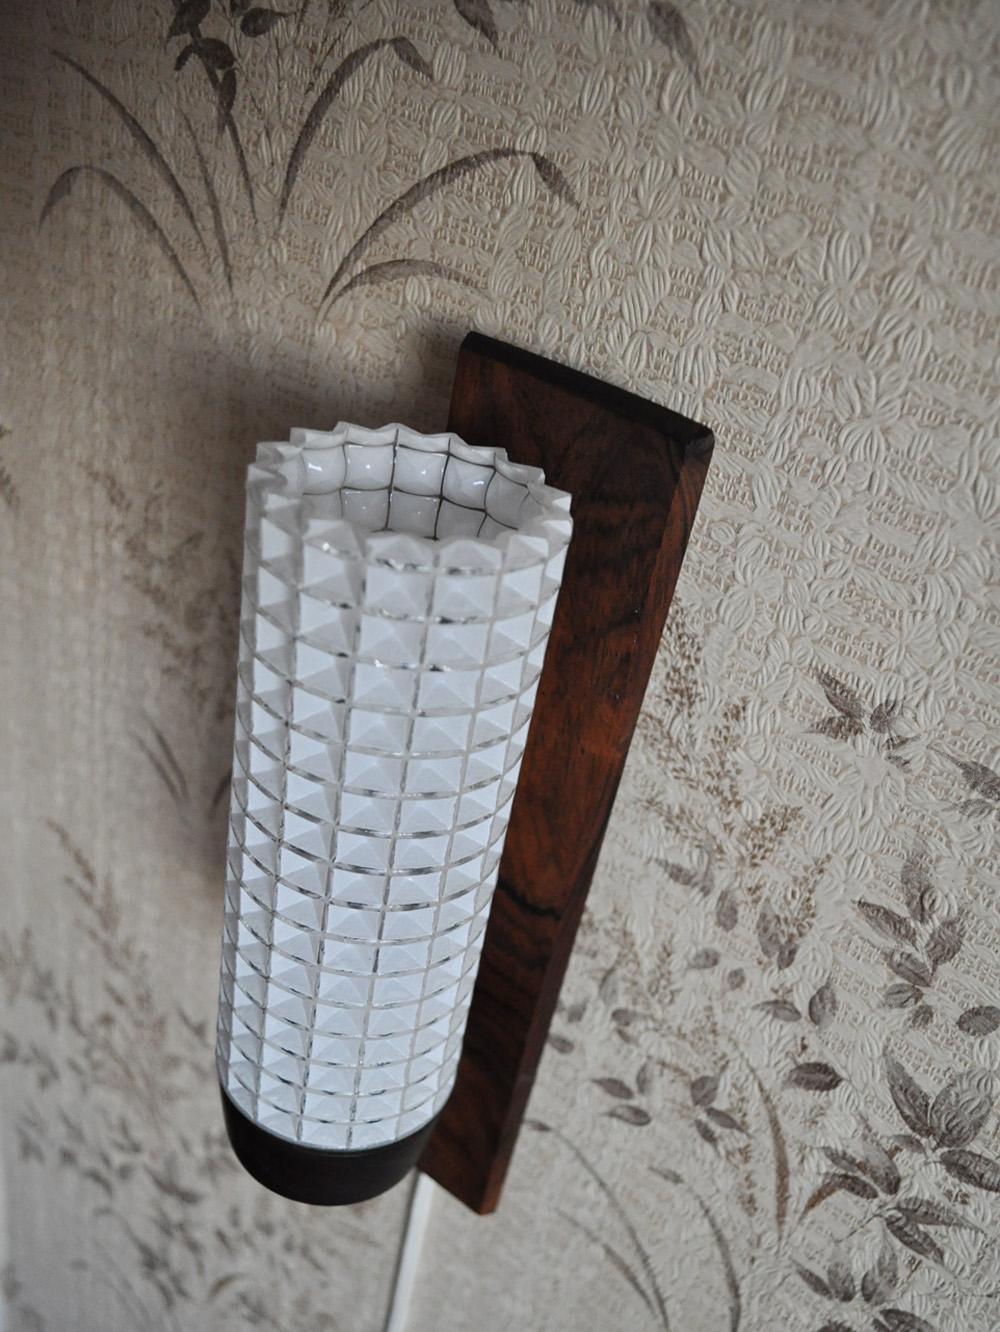 A Danish modern rosewood and glass wall sconce by Lyfa in the 1960s.
The design features a back in black metal and rosewood, Fine brass detail and rosewood holder for the white and transparent glass shade.
Excellent condition.
Measures: Lamp